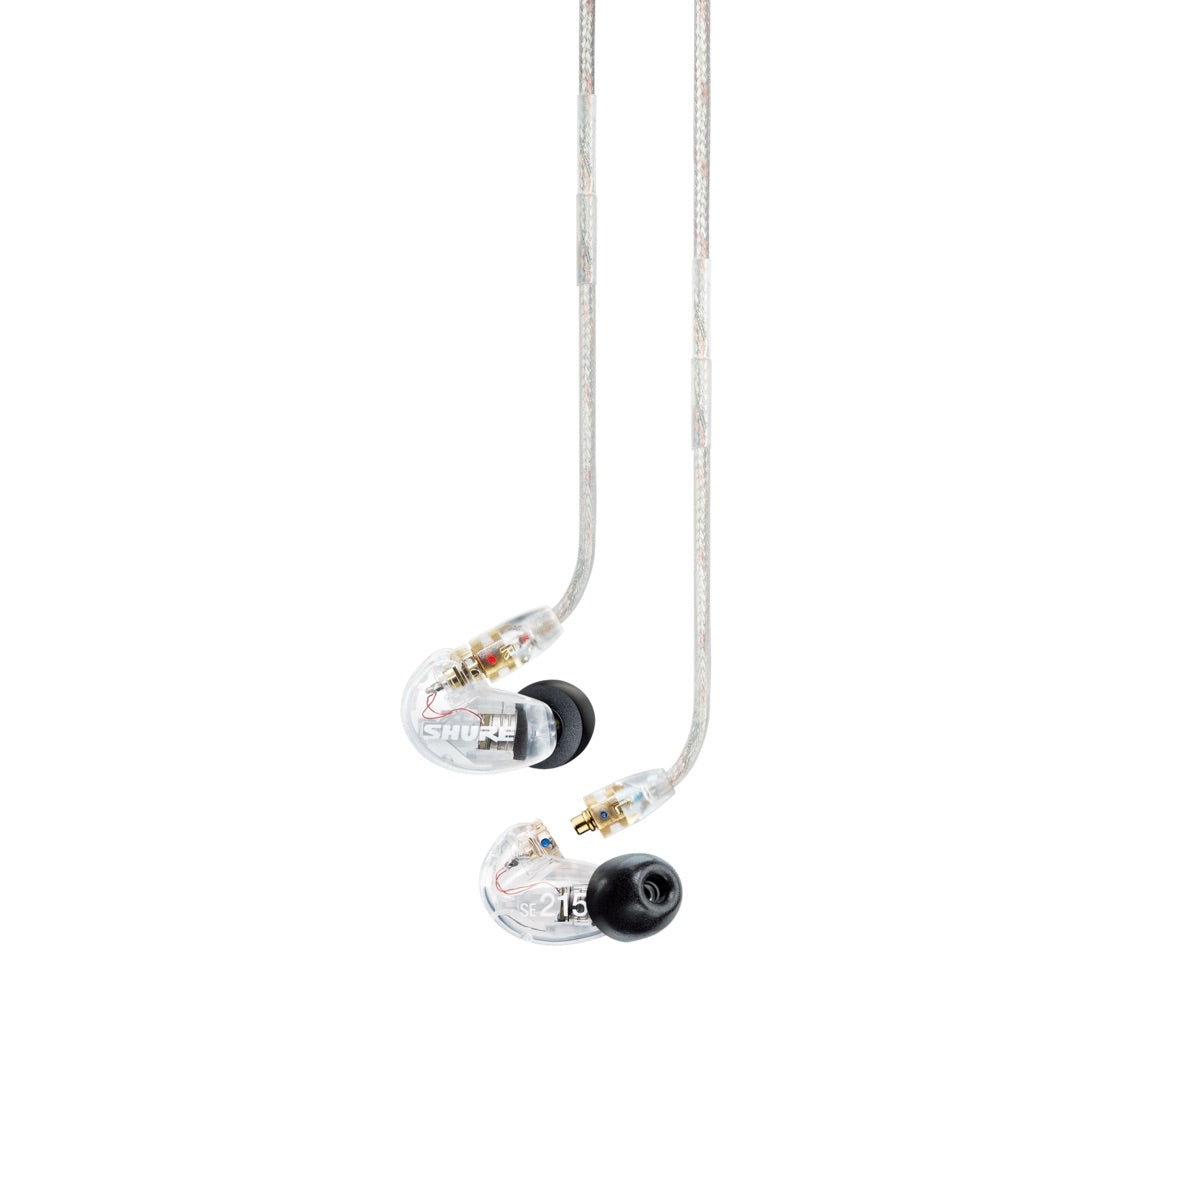 Shure SE215-CL - Professional Sound Isolating Earphones, Clear